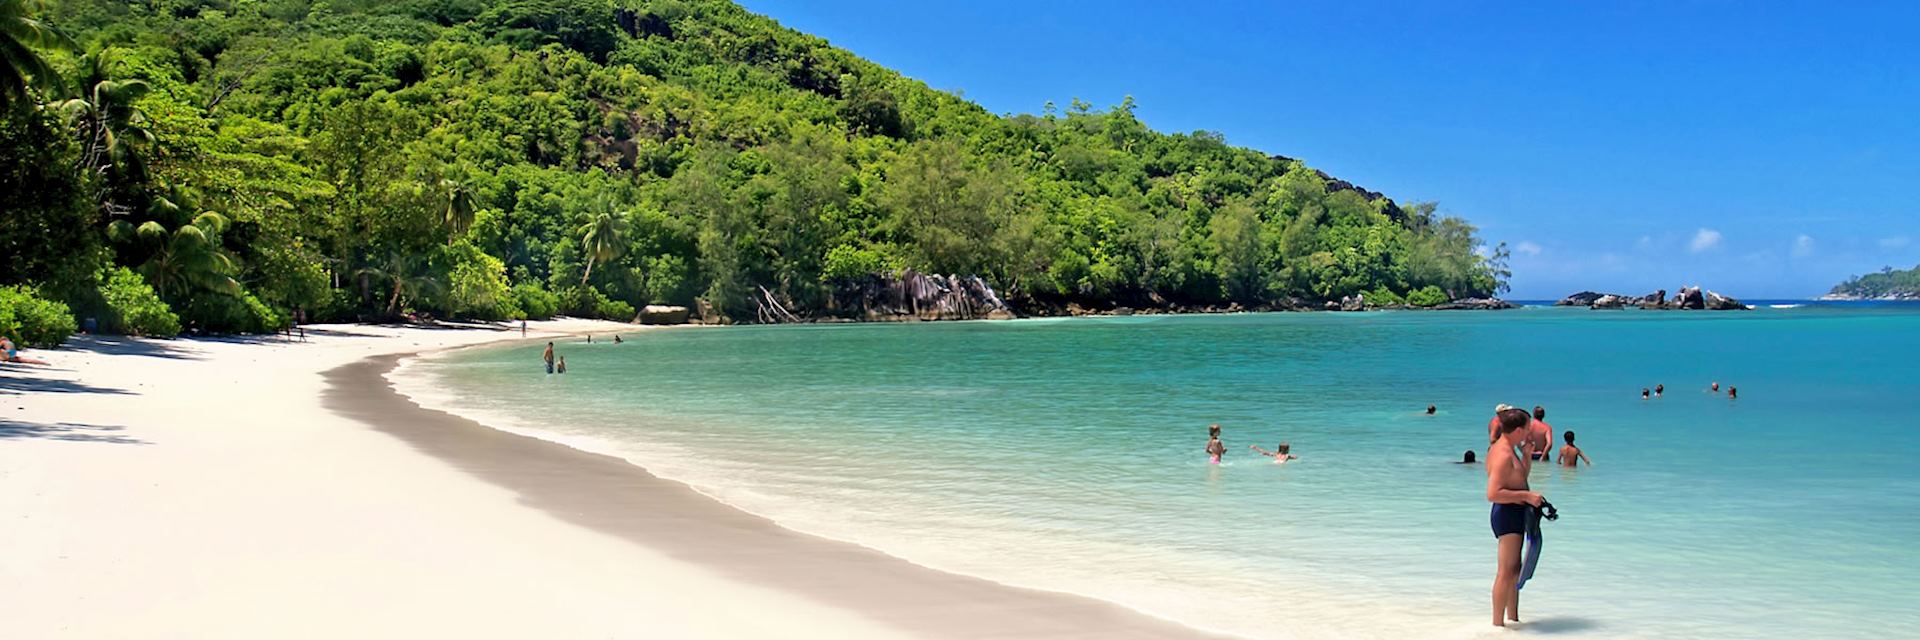 Bathers enjoy the warm, tranquil waters of a Seychelles beach 